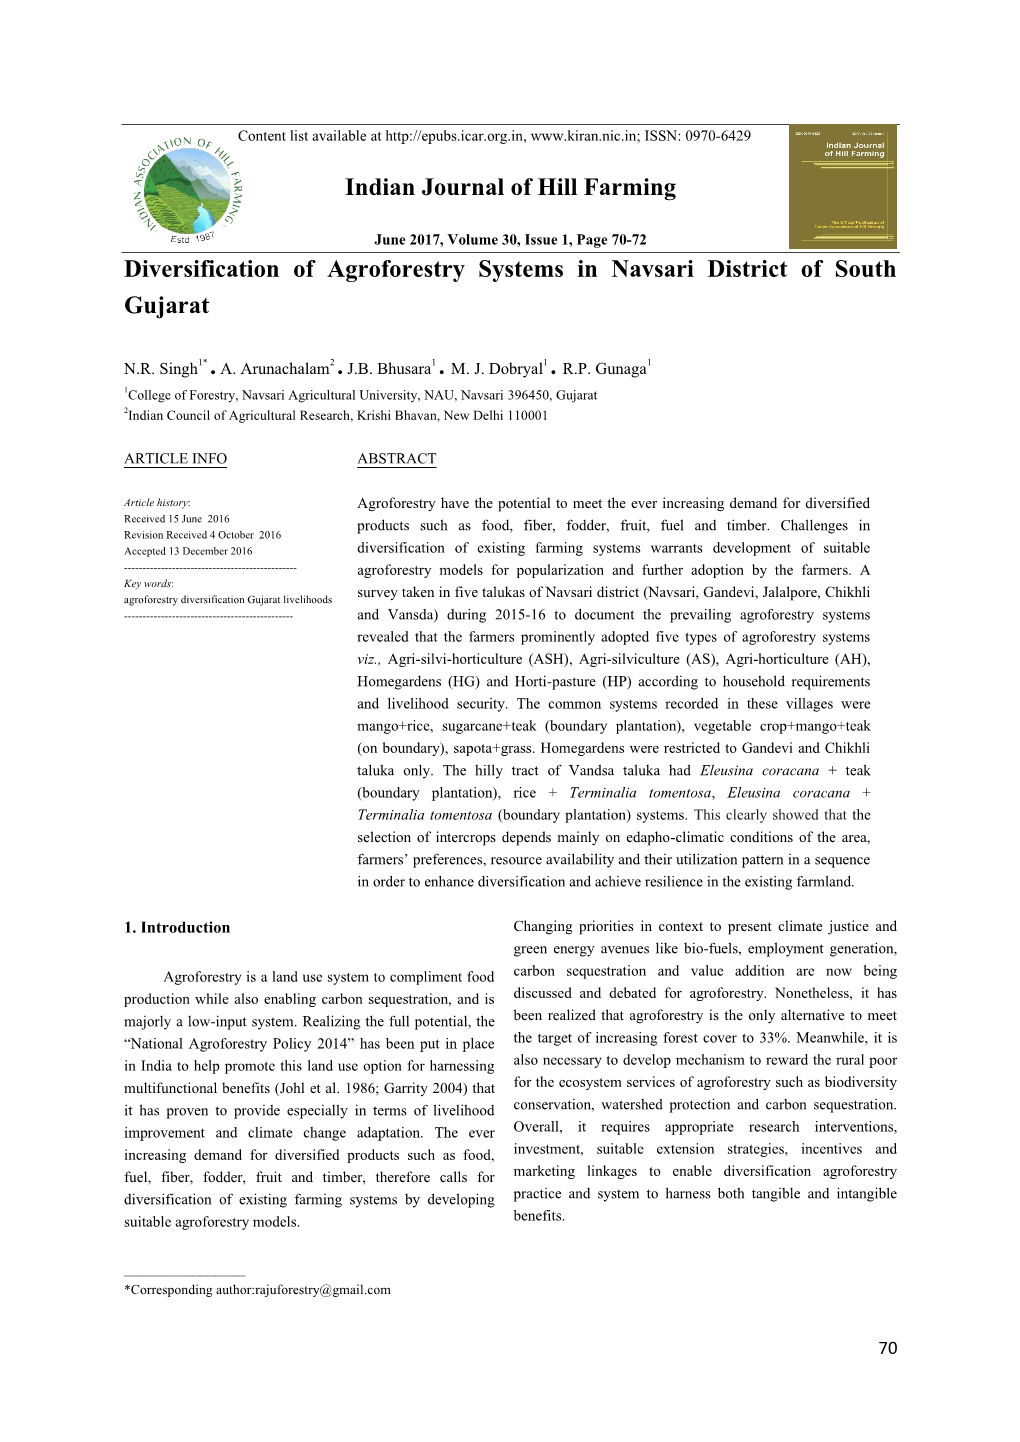 Diversification of Agroforestry Systems in Navsari District of South Gujarat